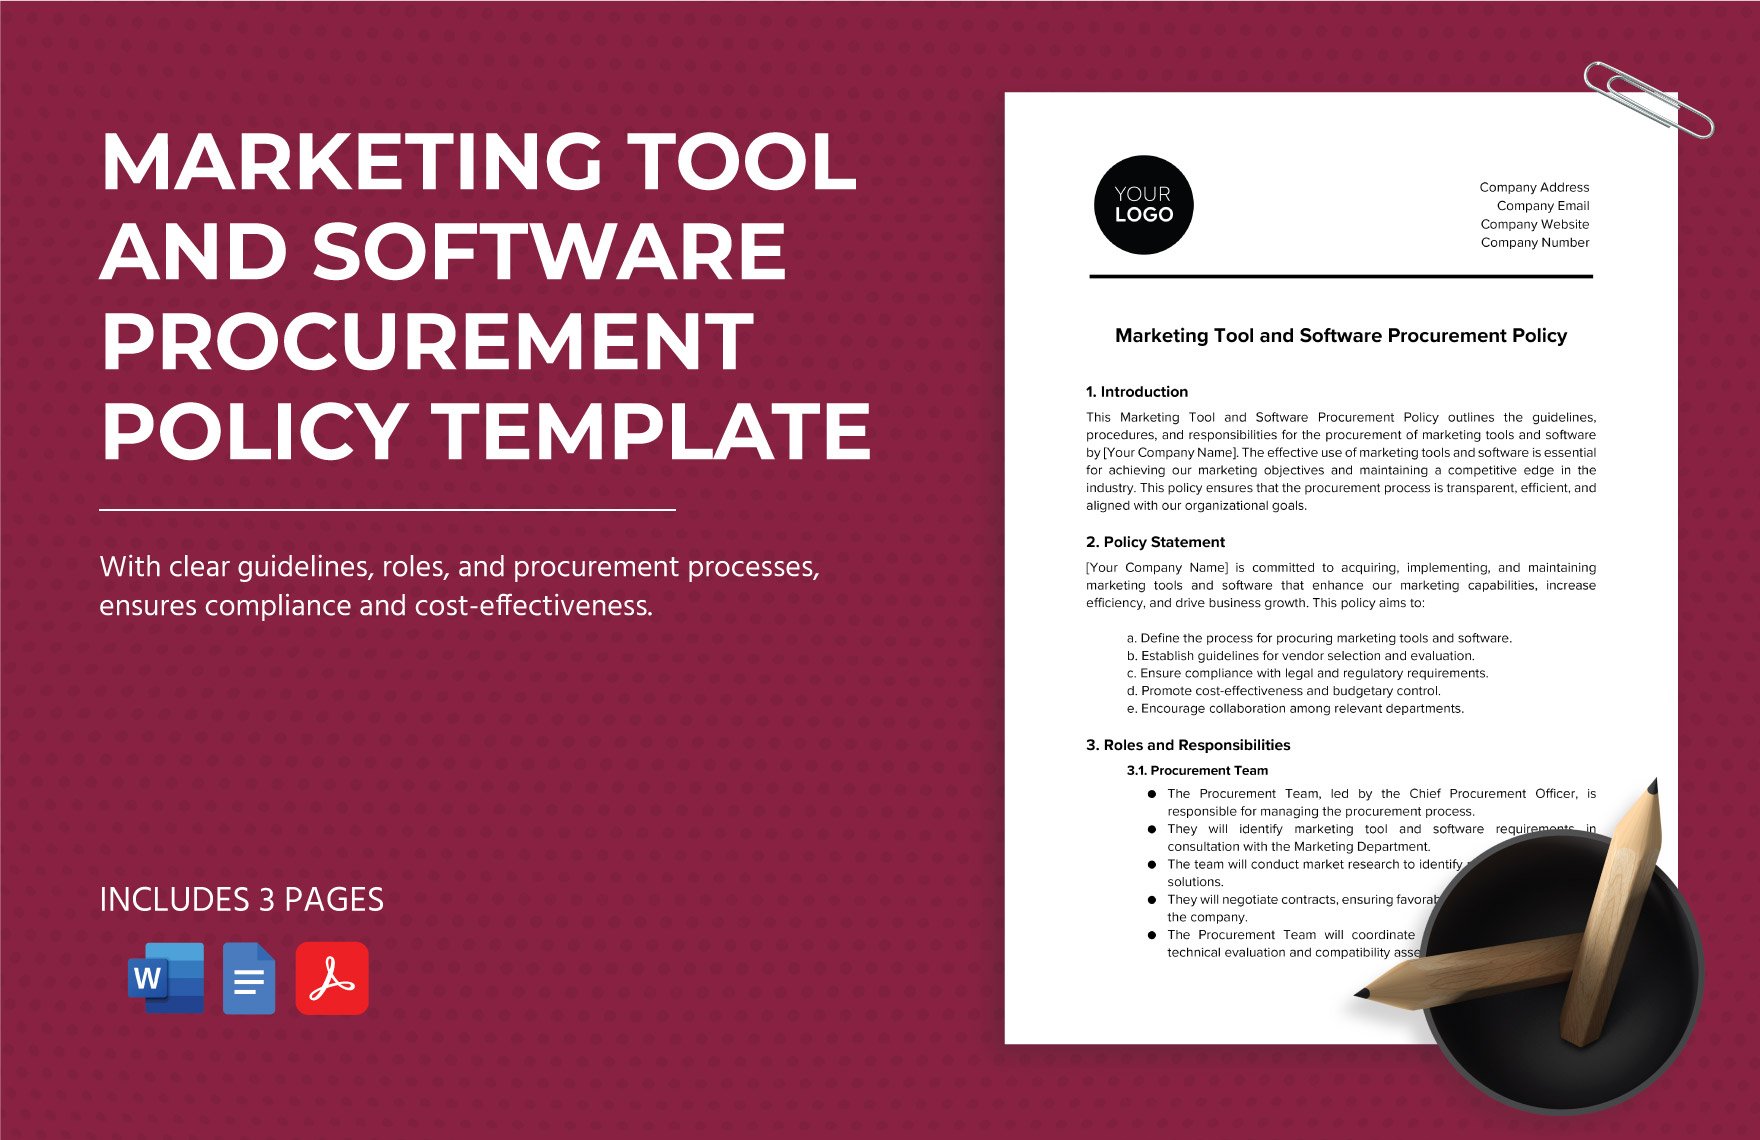 Marketing Tool and Software Procurement Policy Template